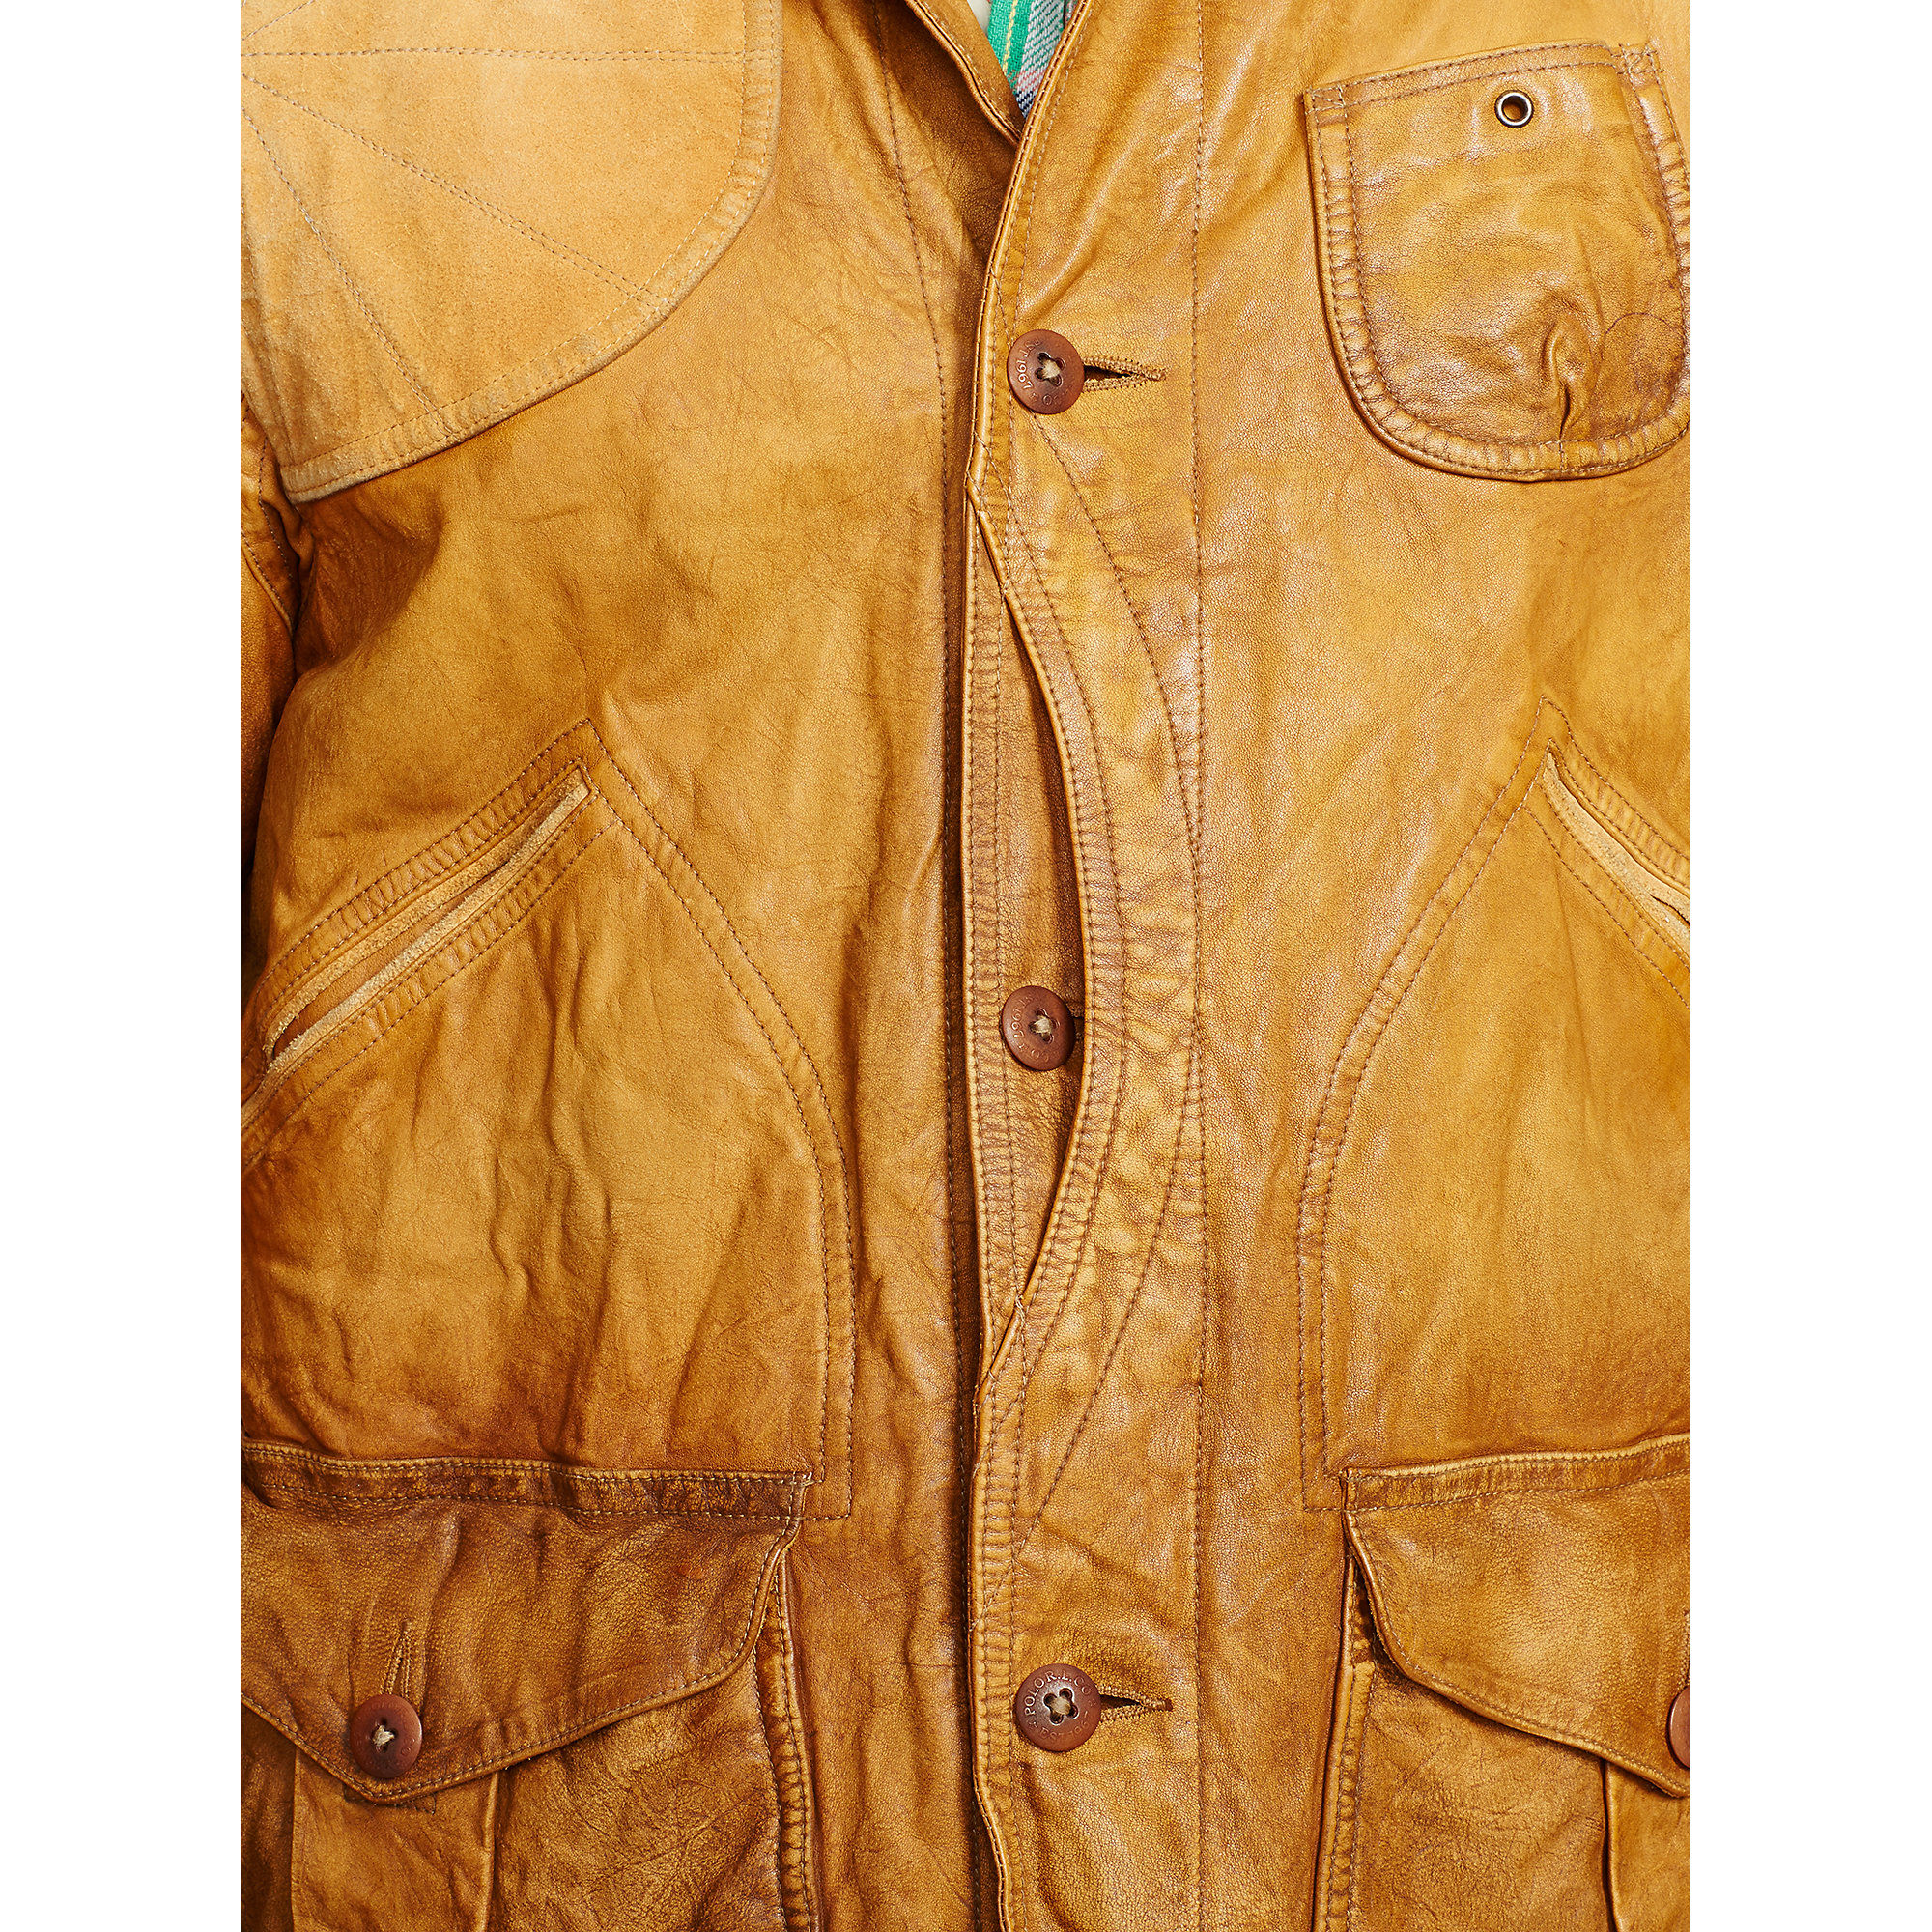 Lyst - Polo Ralph Lauren Leather Hunting Jacket in Brown for Men